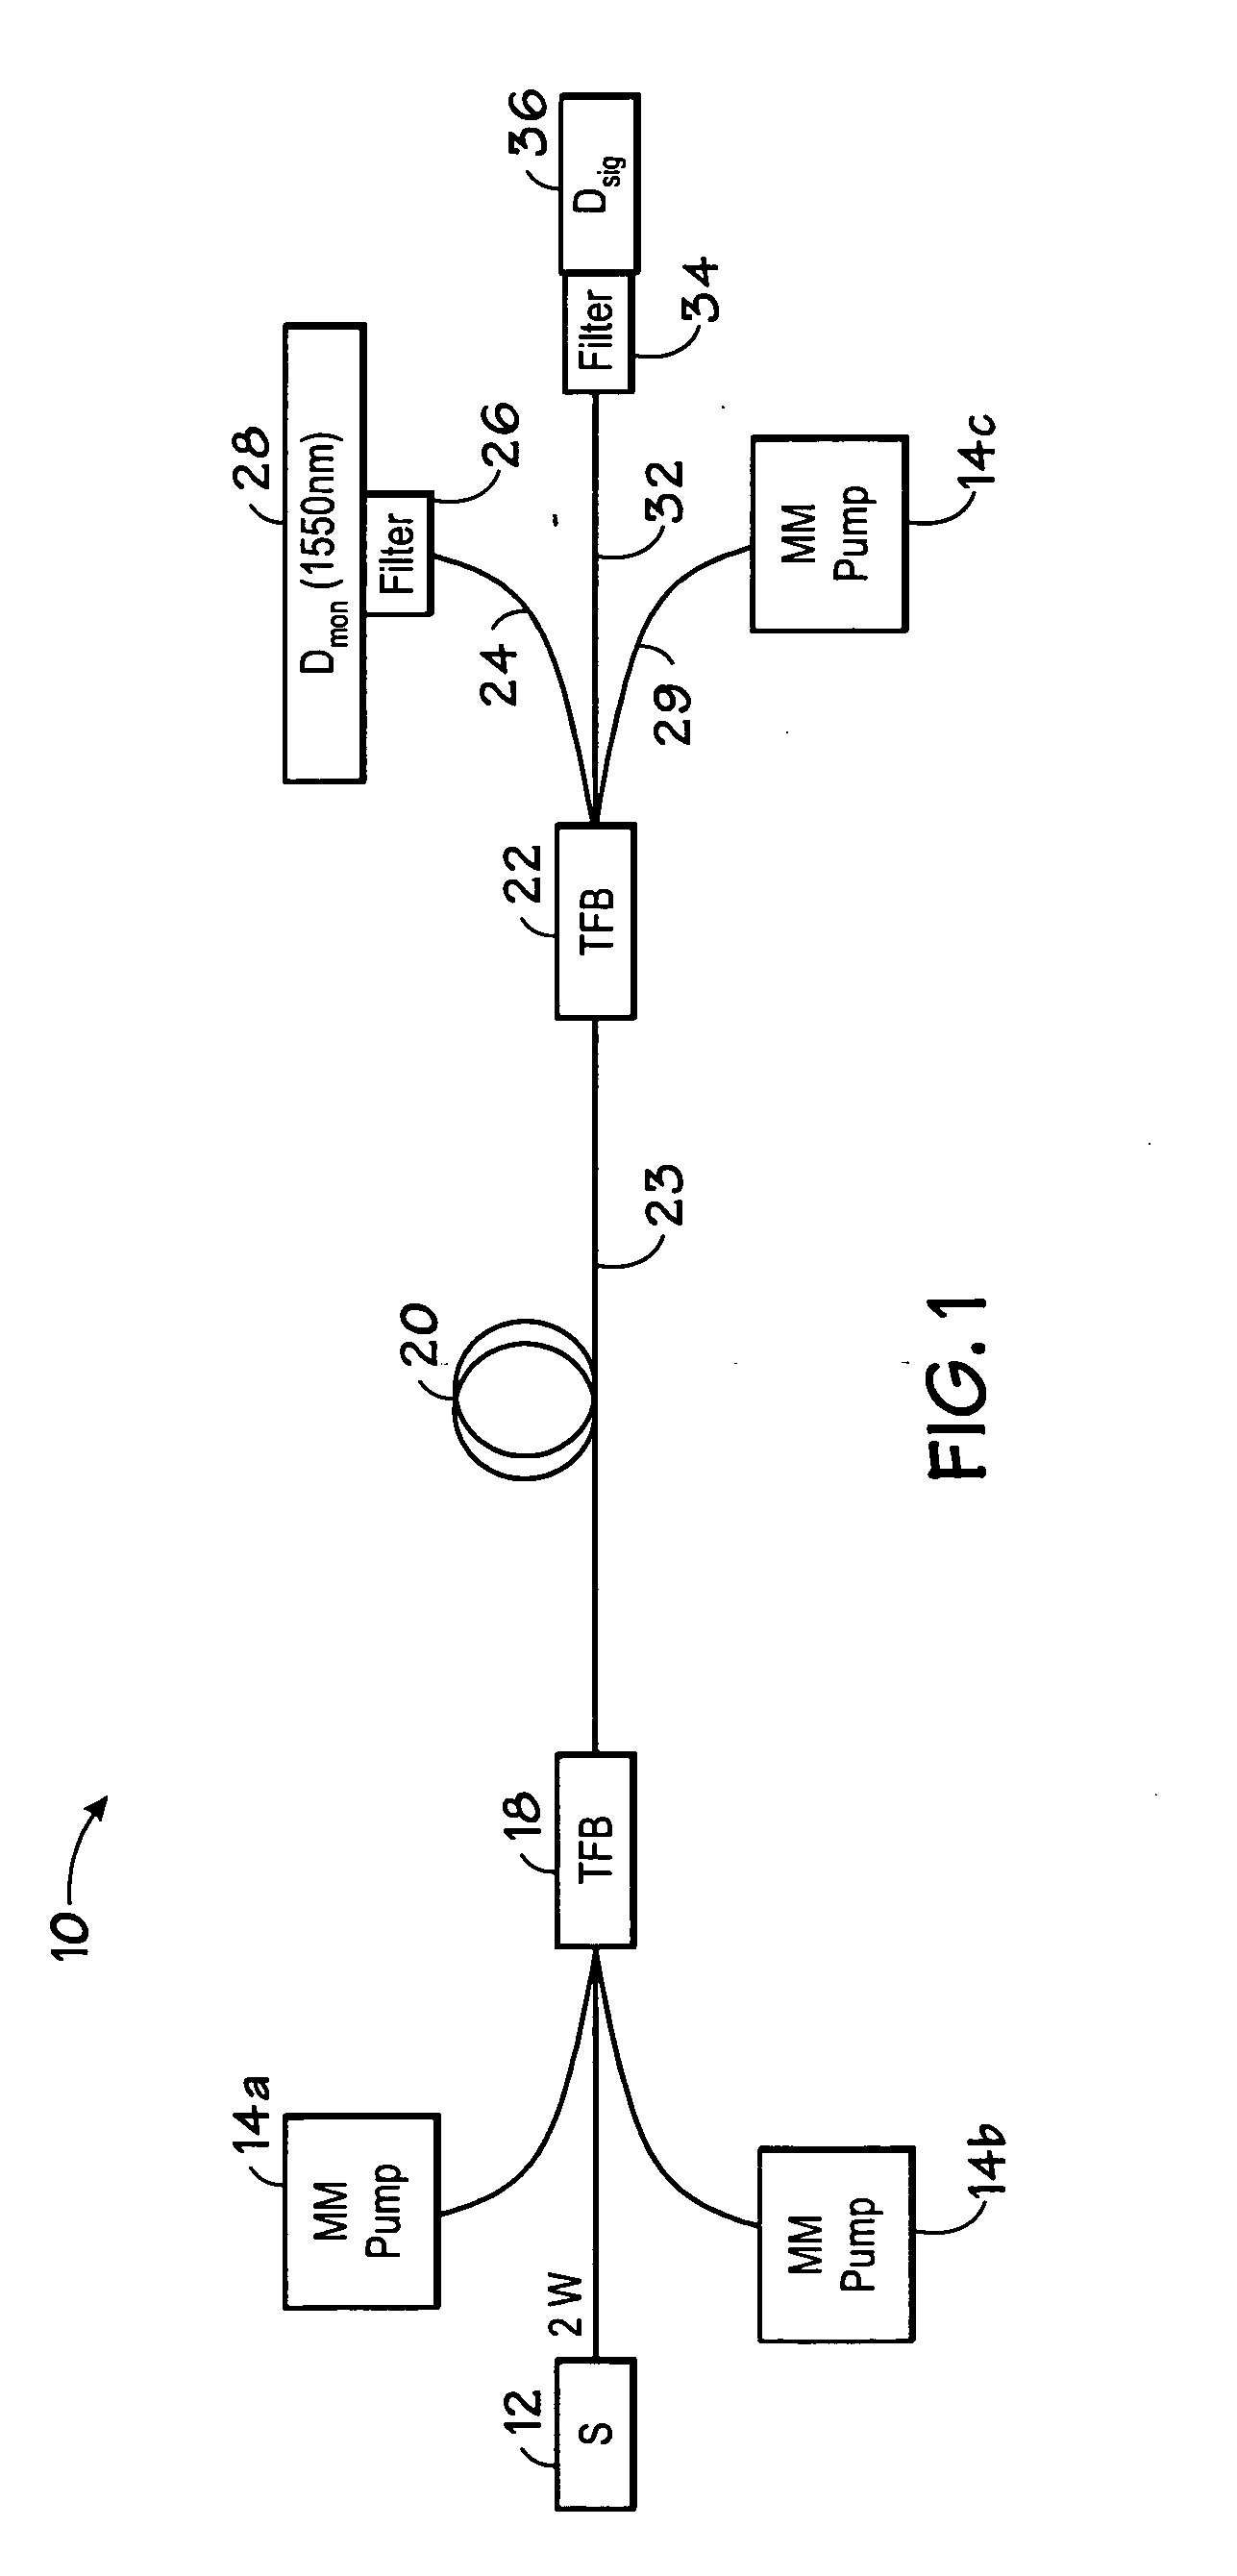 Tapered fiber bundle apparatus with monitoring capability